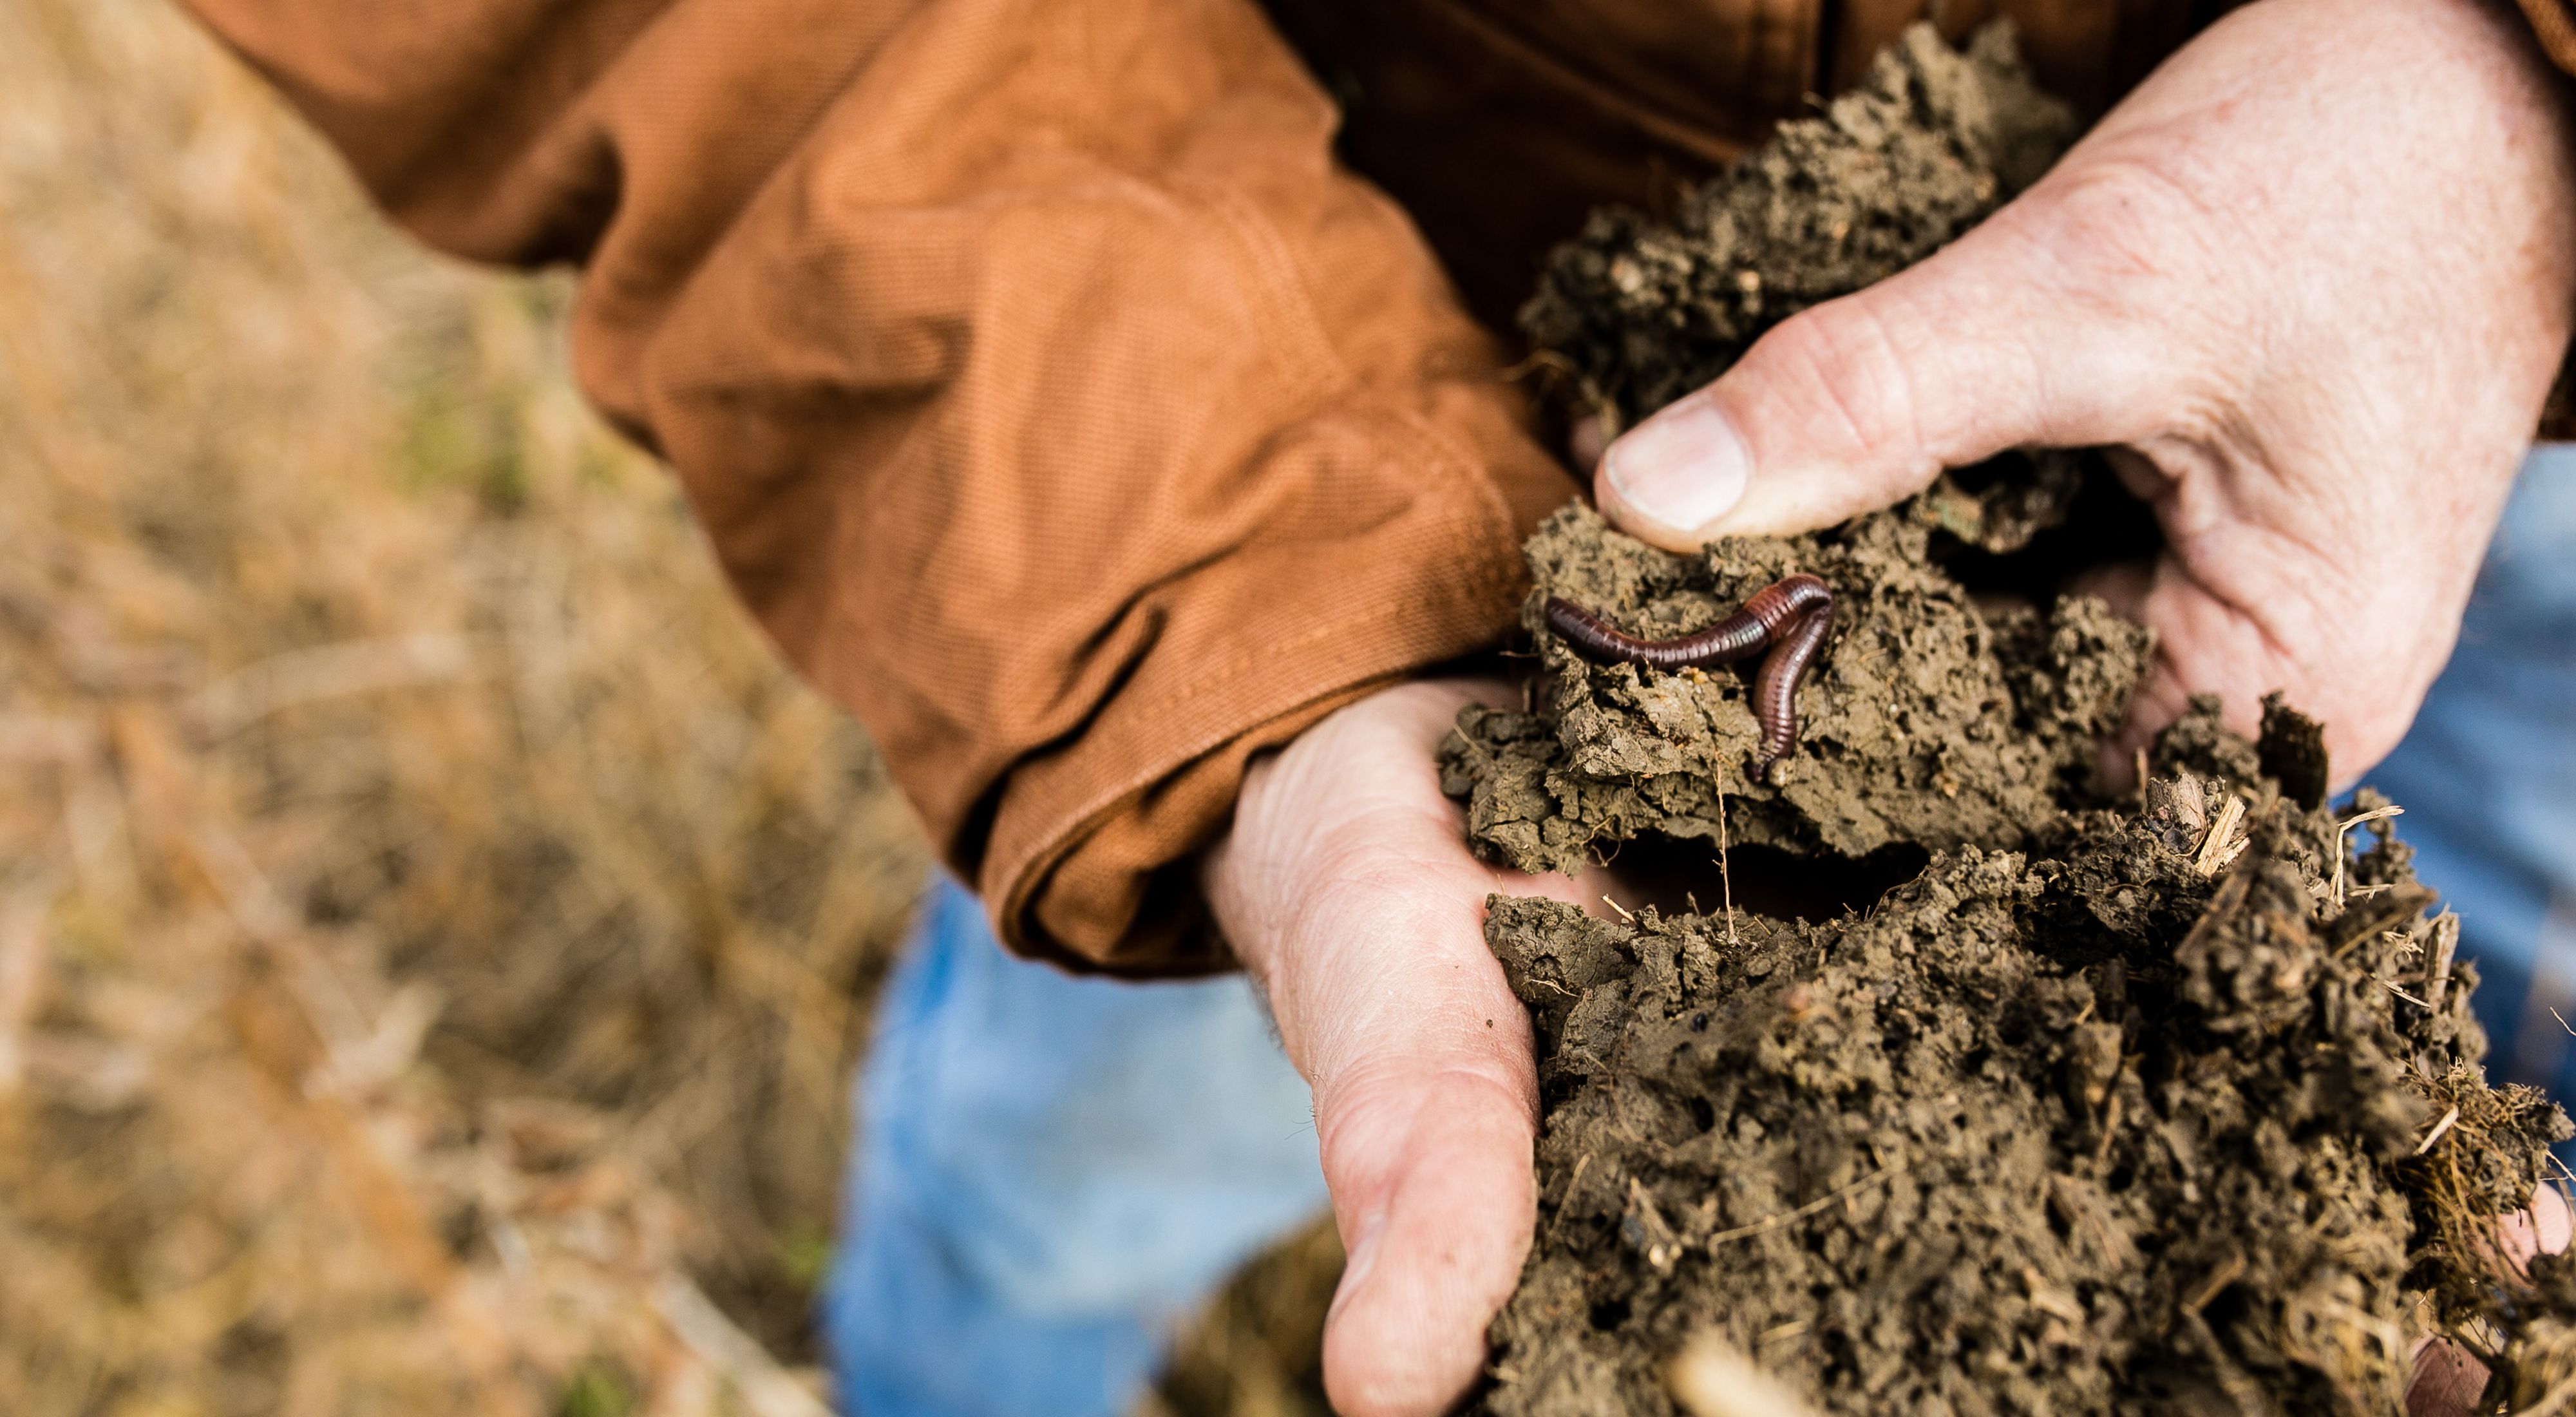 Man holding soil with a worm visible in it.